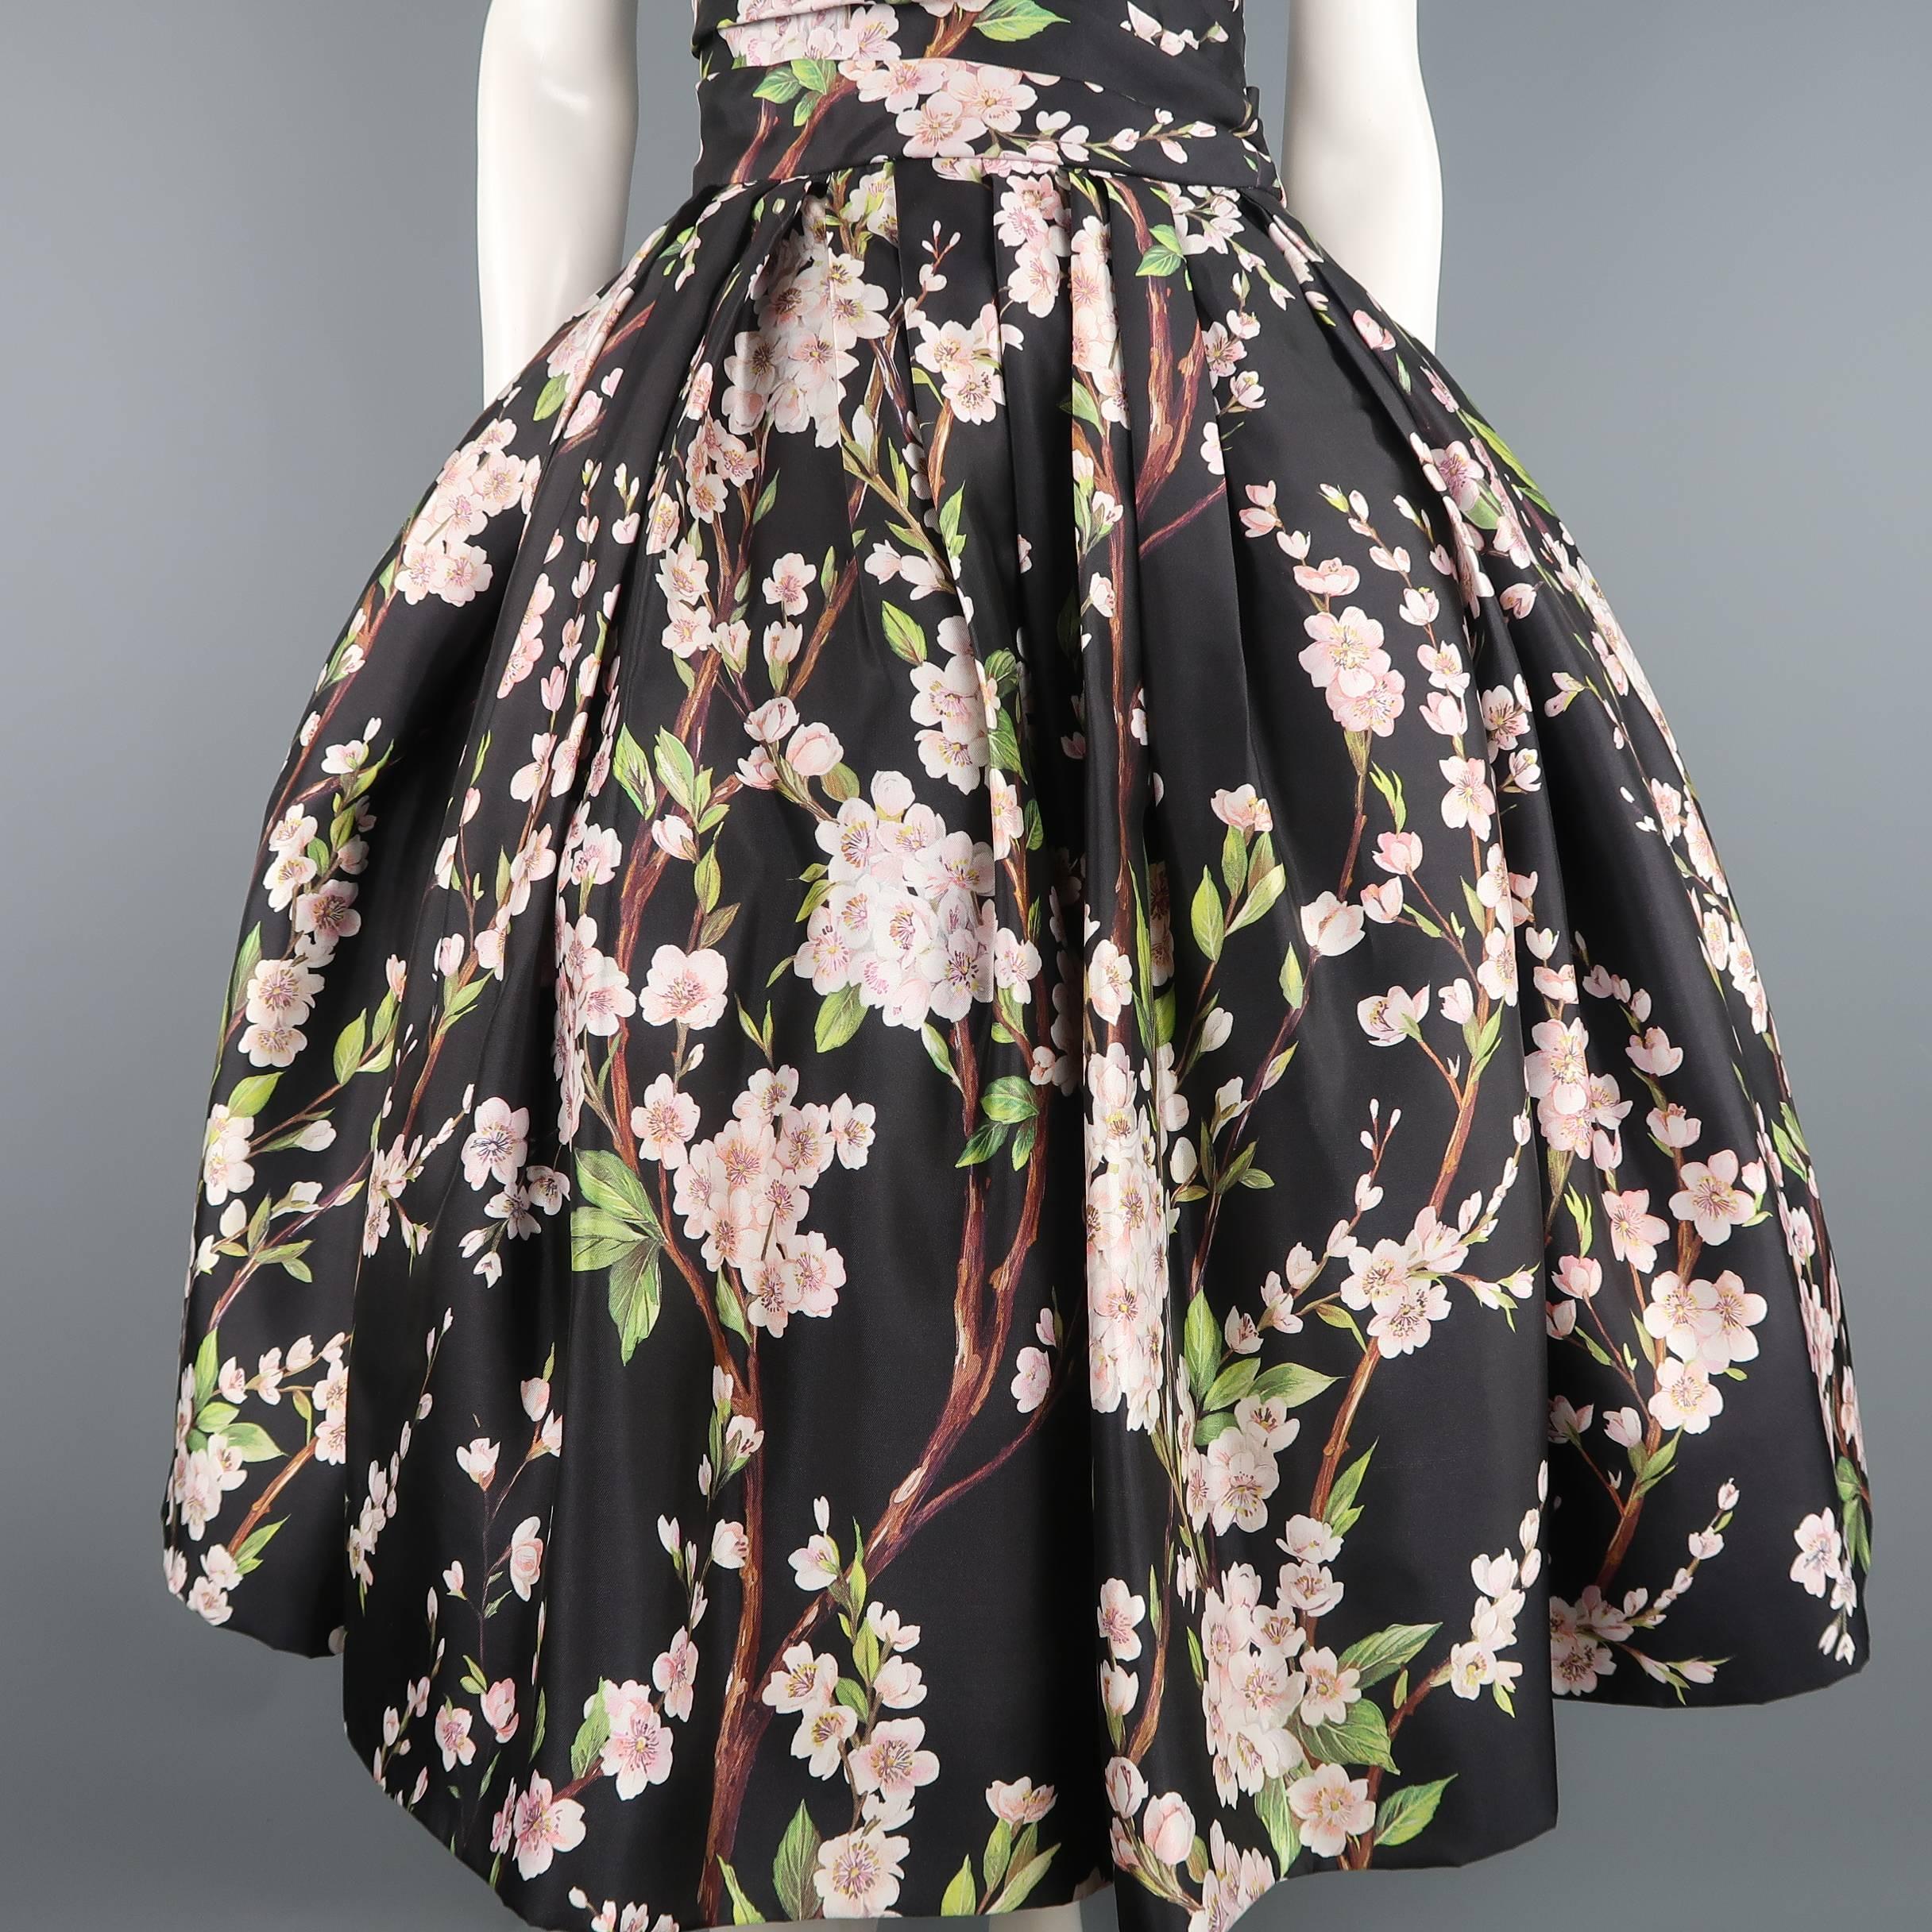 This gorgeous DOLCE & GABBANA cocktail dress comes in black silk twill with all over cherry blossom floral print and features an asymmetrical pleated fully boned bustier bodice with pointed sweetheart line and midi length circle skirt with full